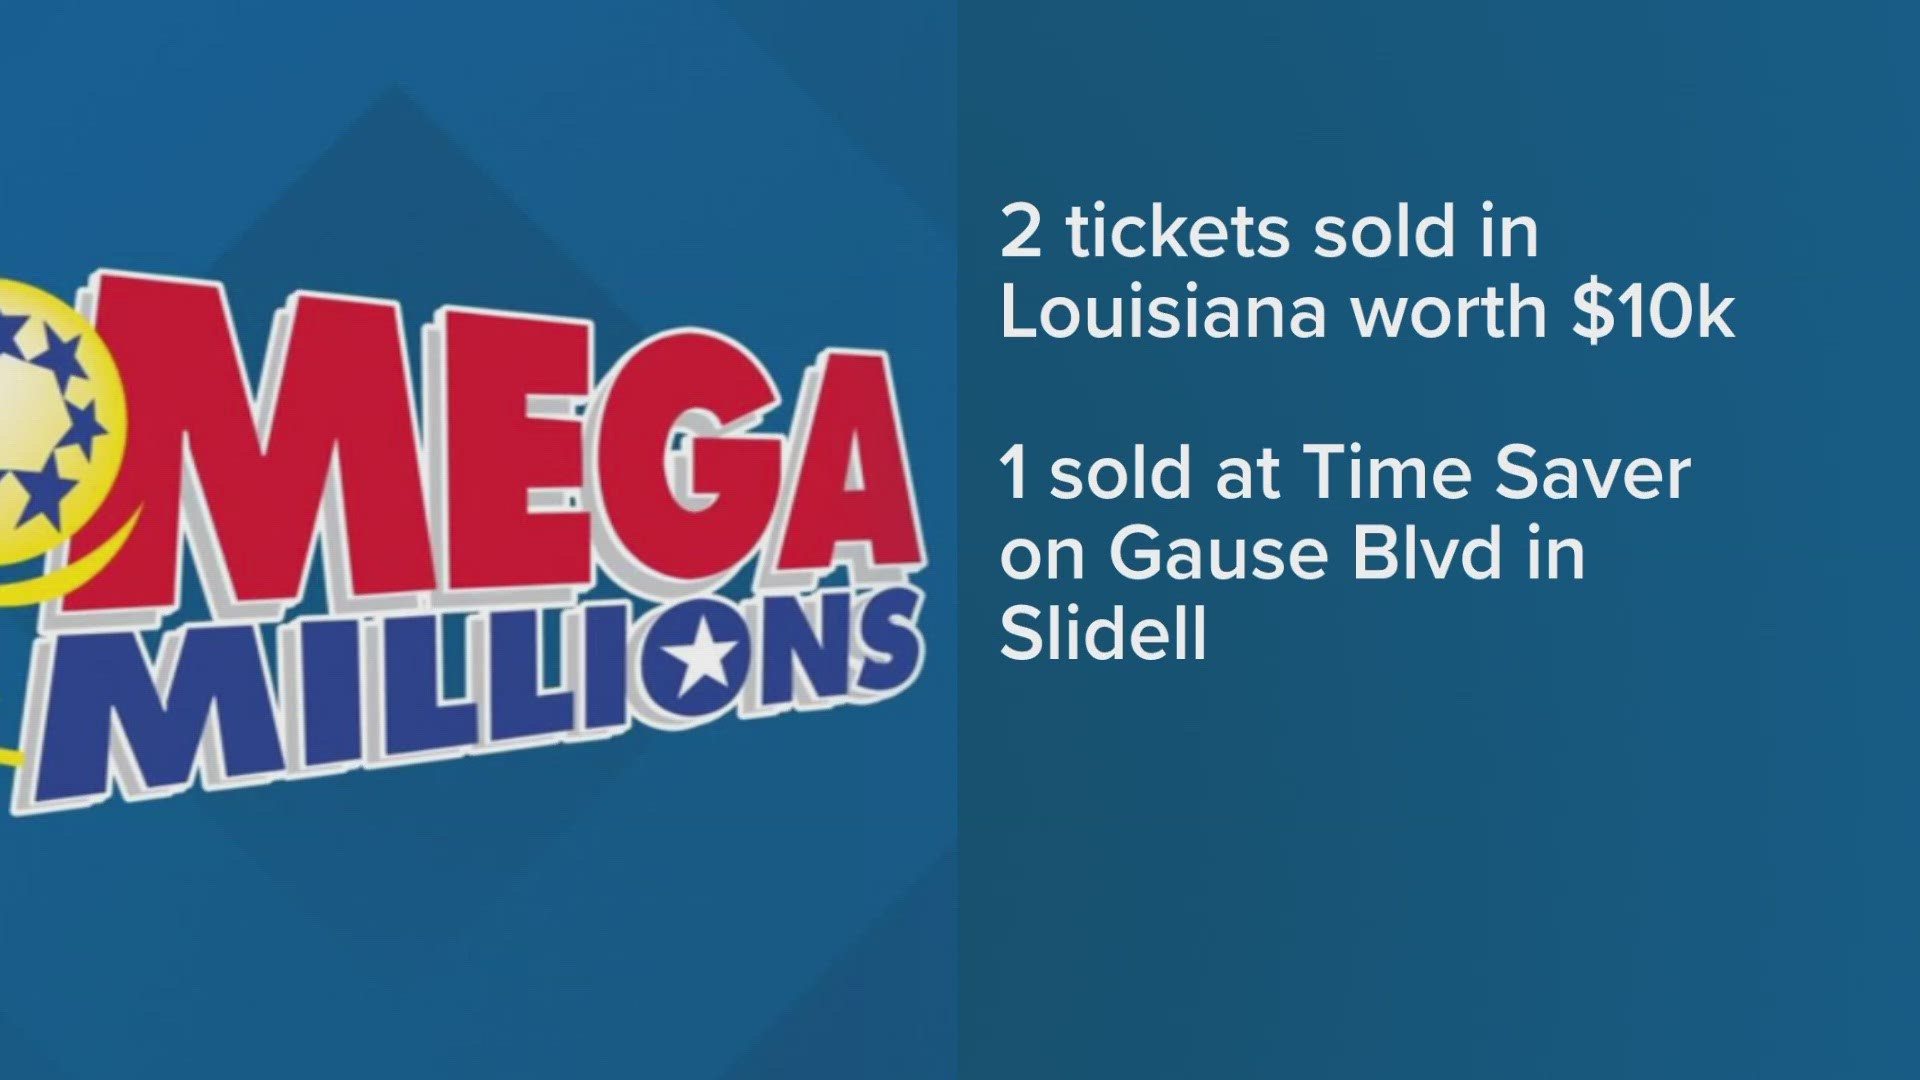 One ticket was sold on the Northshore at the Time Saver on Gause Boulevard in Slidell. The other was sold in Youngsville La.